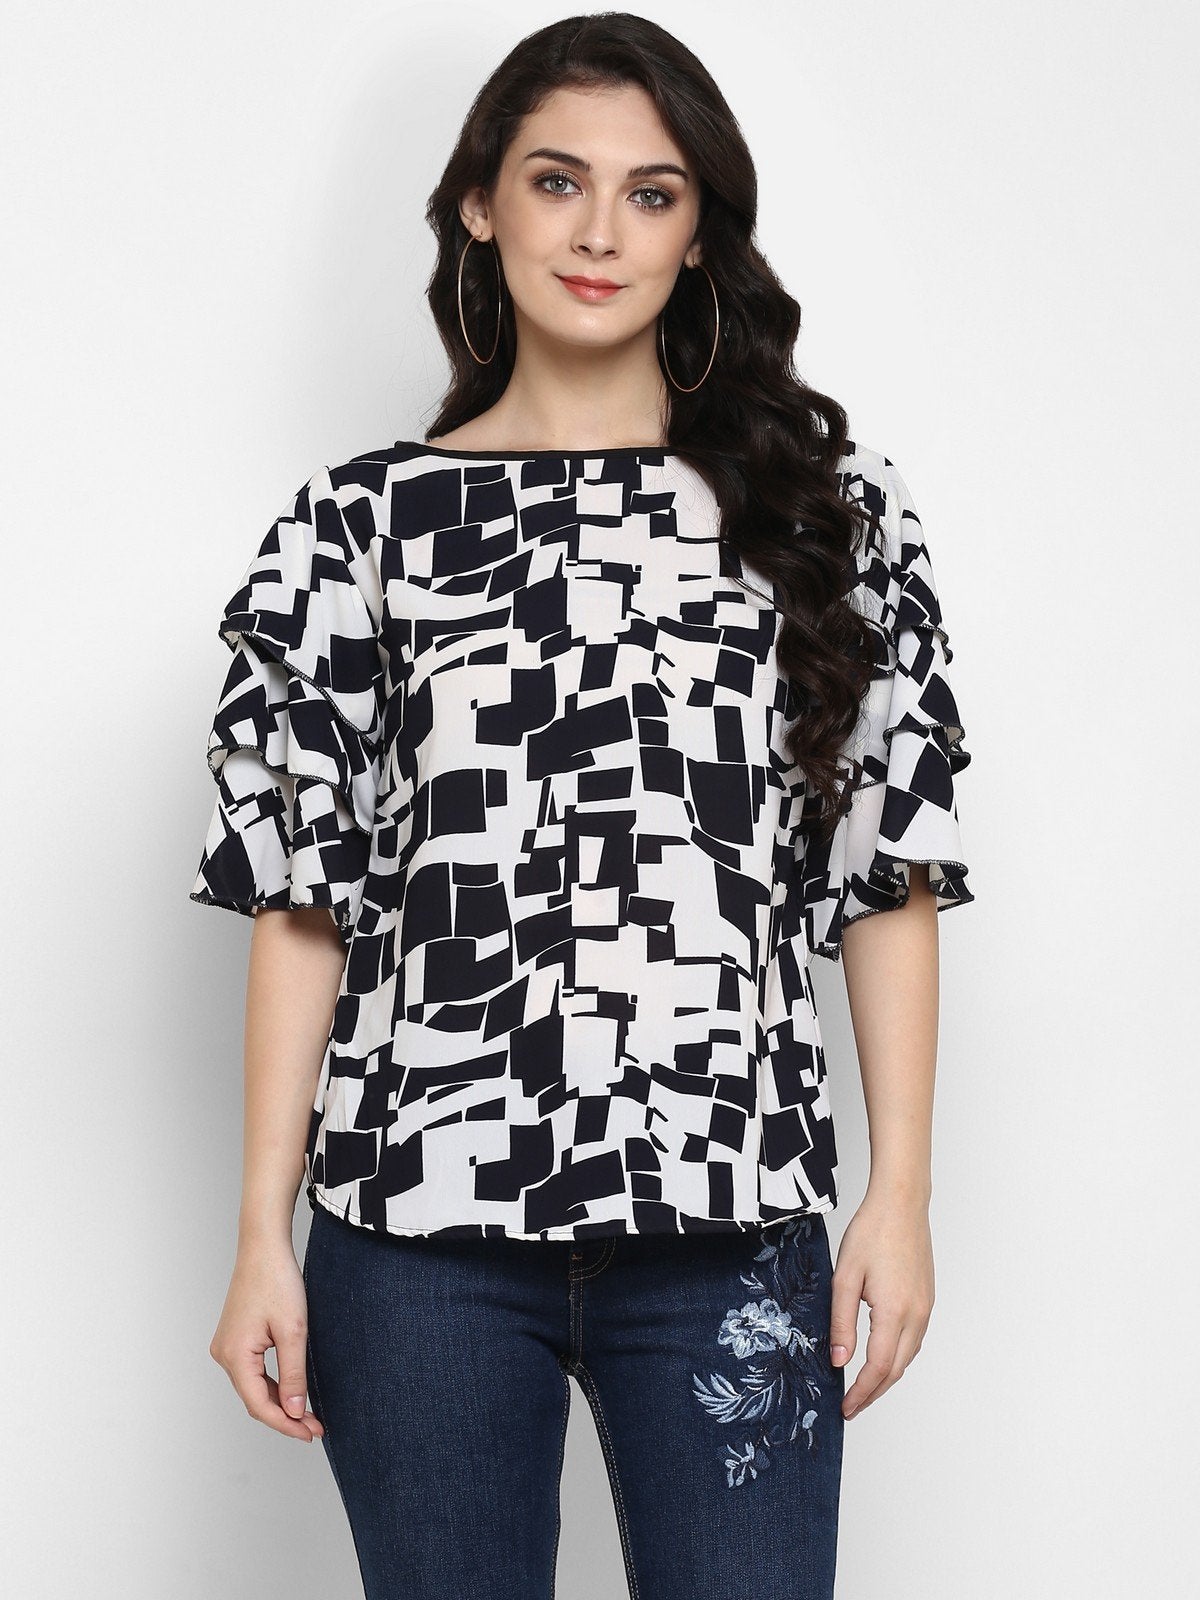 Women's Abstract Printed Triple Flared Sleeves Top - Pannkh